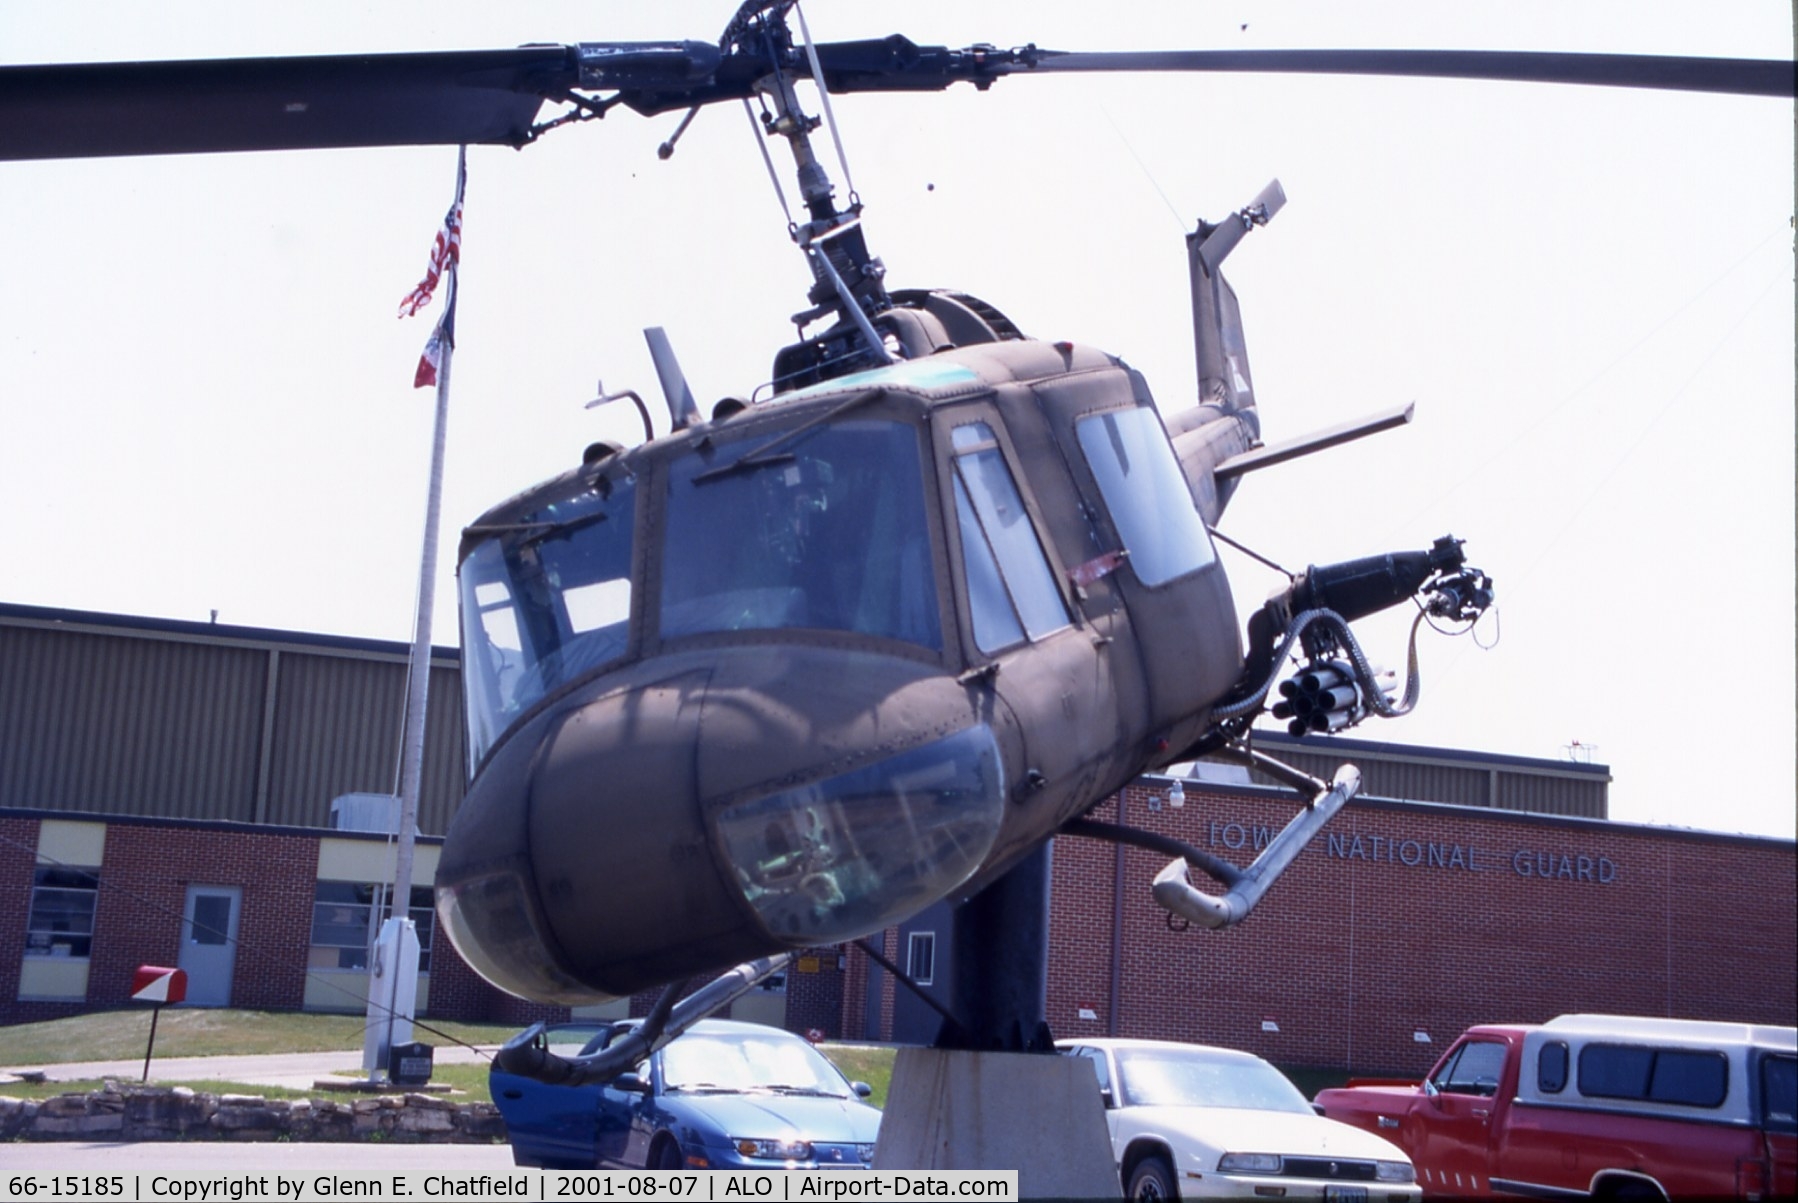 66-15185, 1967 Bell UH-1M Iroquois C/N 1913, UH-1M mounted on a post at the Army National Guard armory